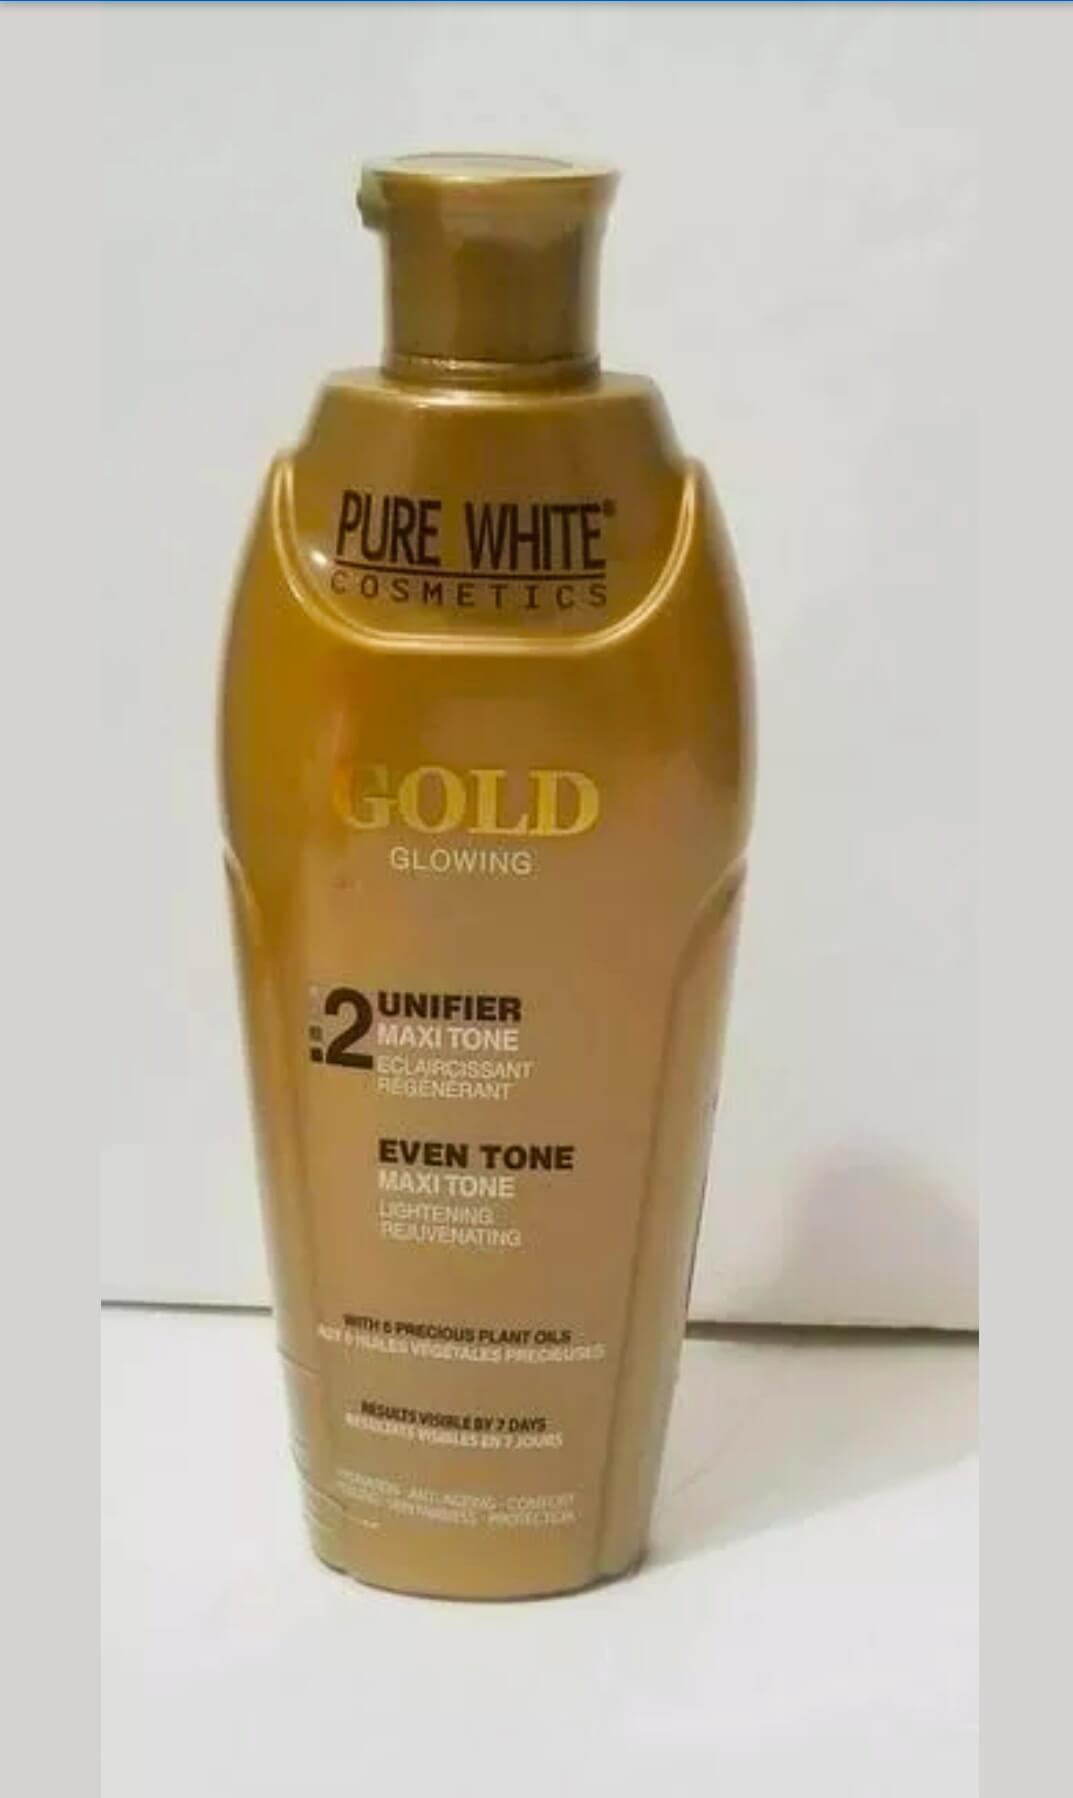 Pure White Cosmetics Gold Glowing Lotion 400ml